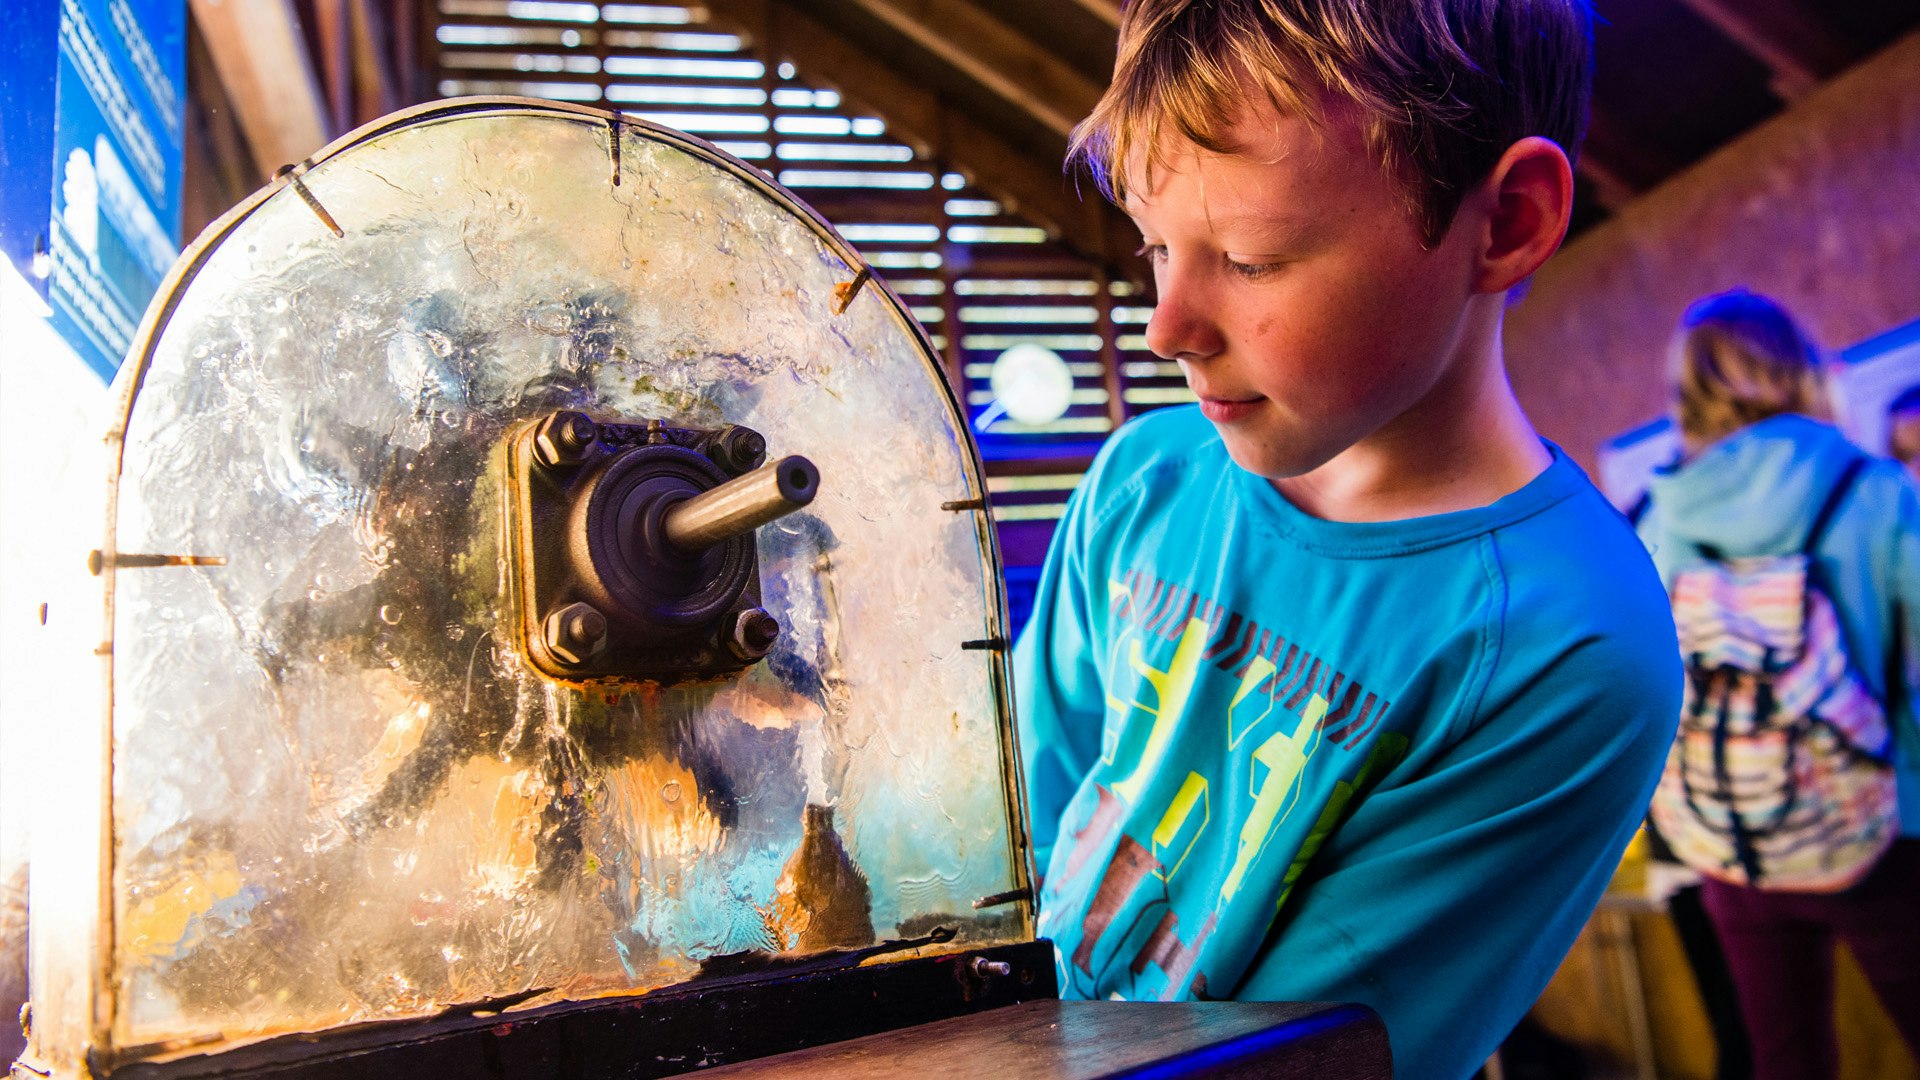 Child looks at the interactive hydro electric display